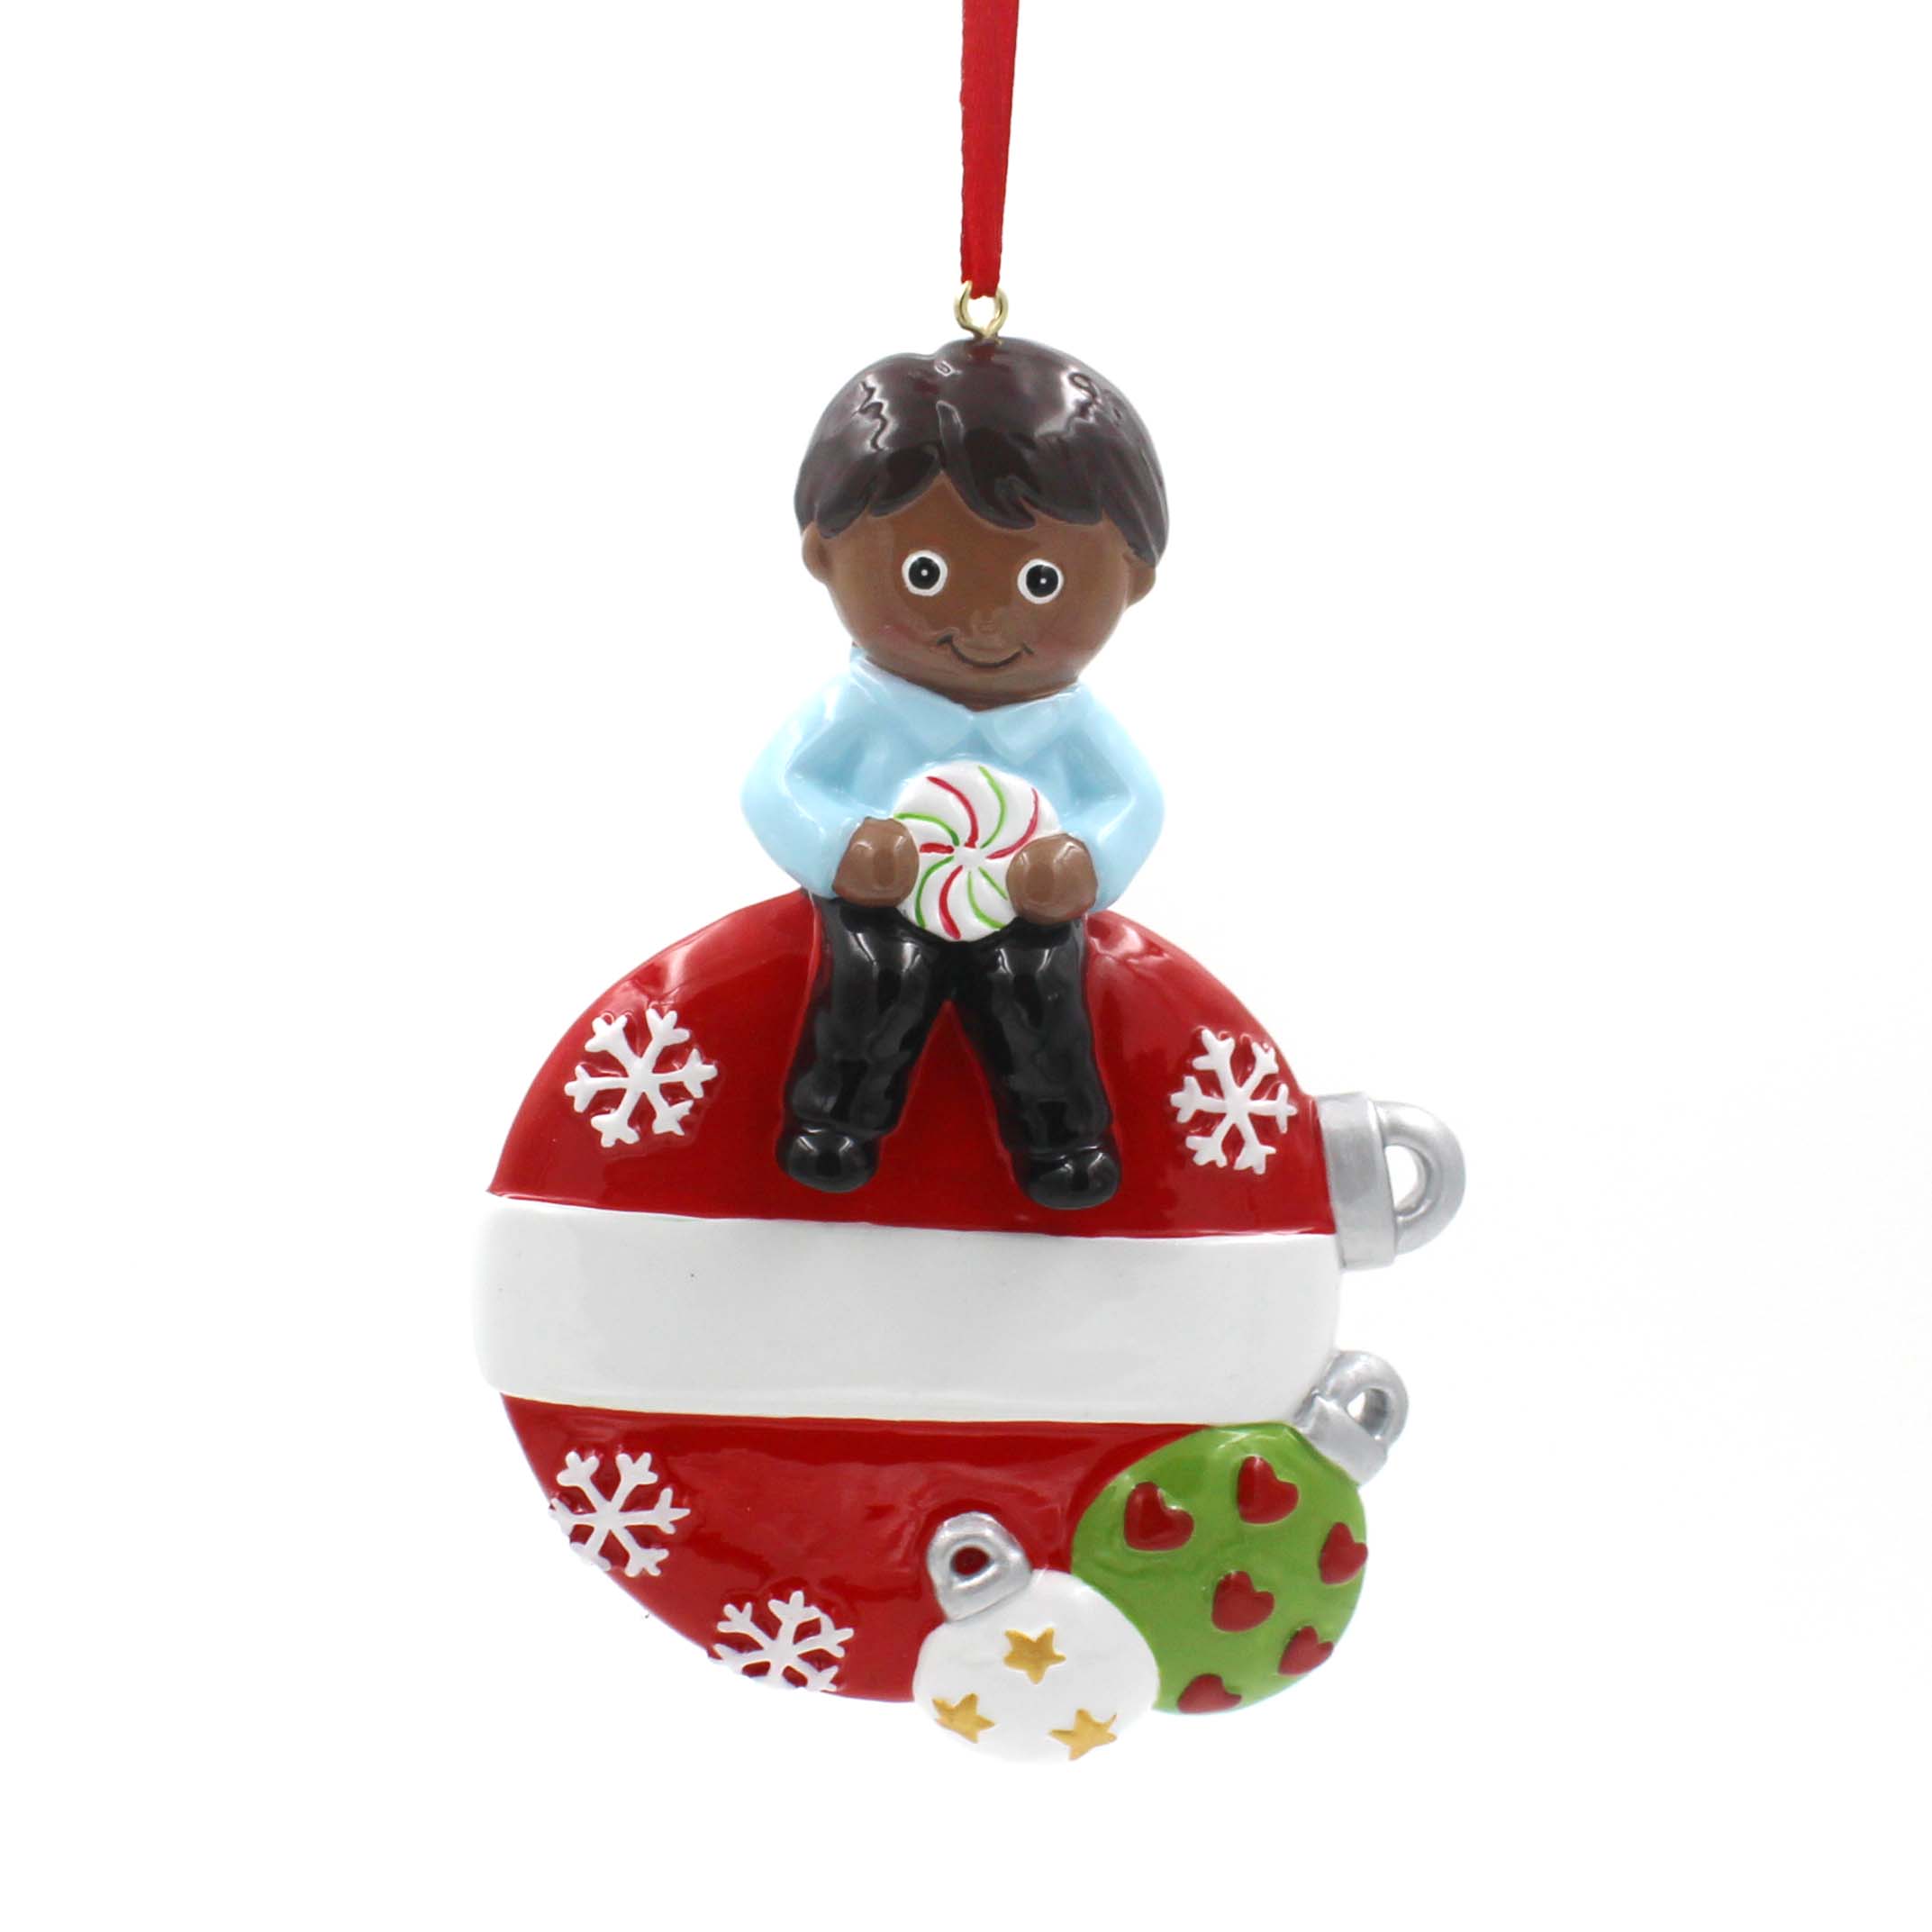 Christmas Ball With Boy Ornament Personalized Christmas Tree Ornament